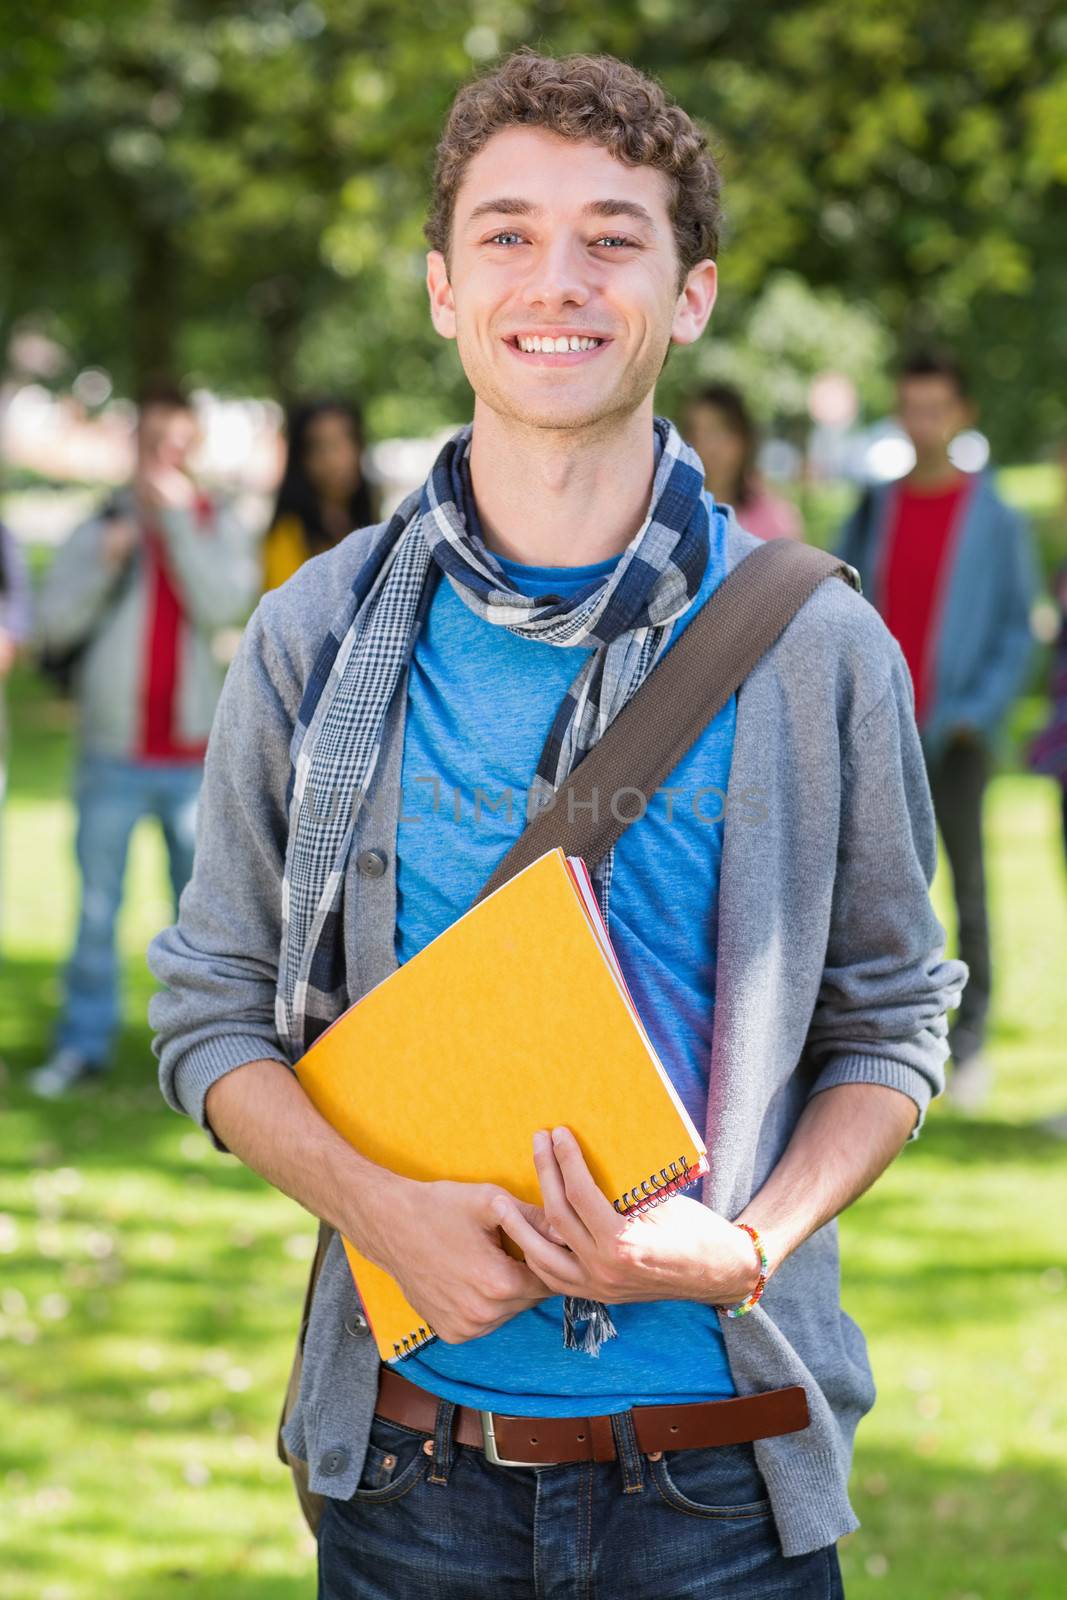 College boy holding books with blurred students in park by Wavebreakmedia